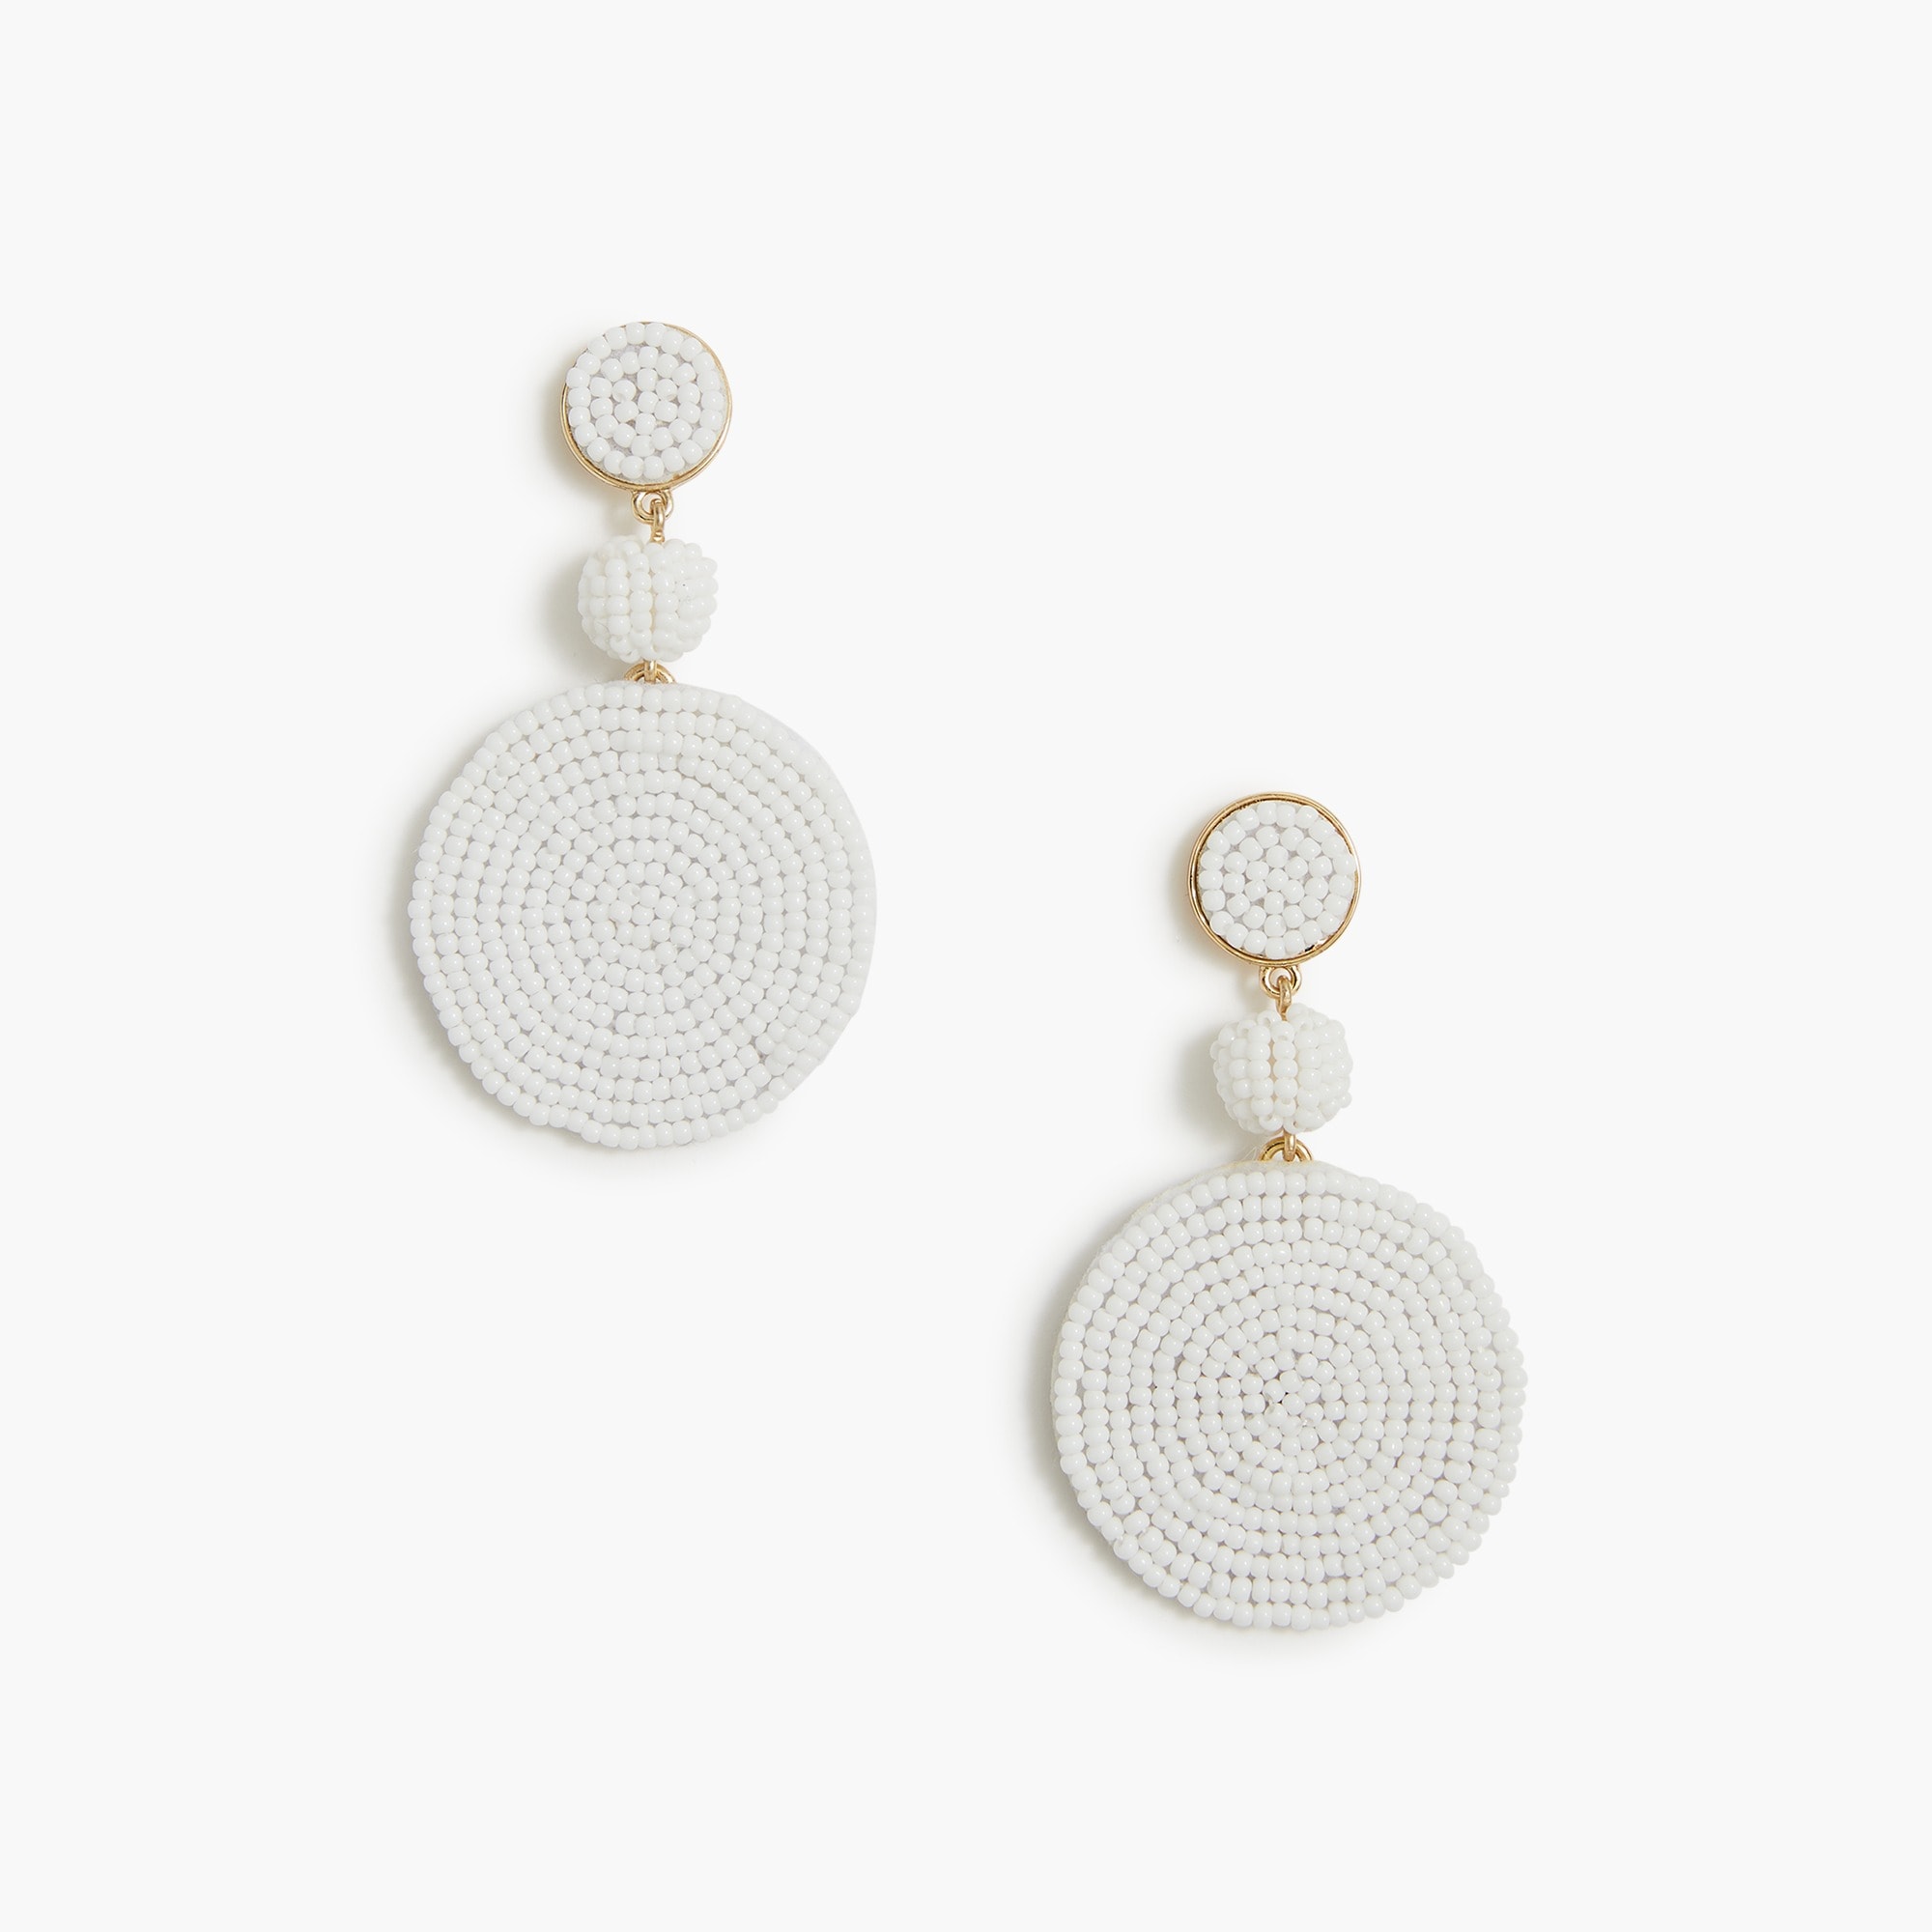  Large circle beaded statement earrings